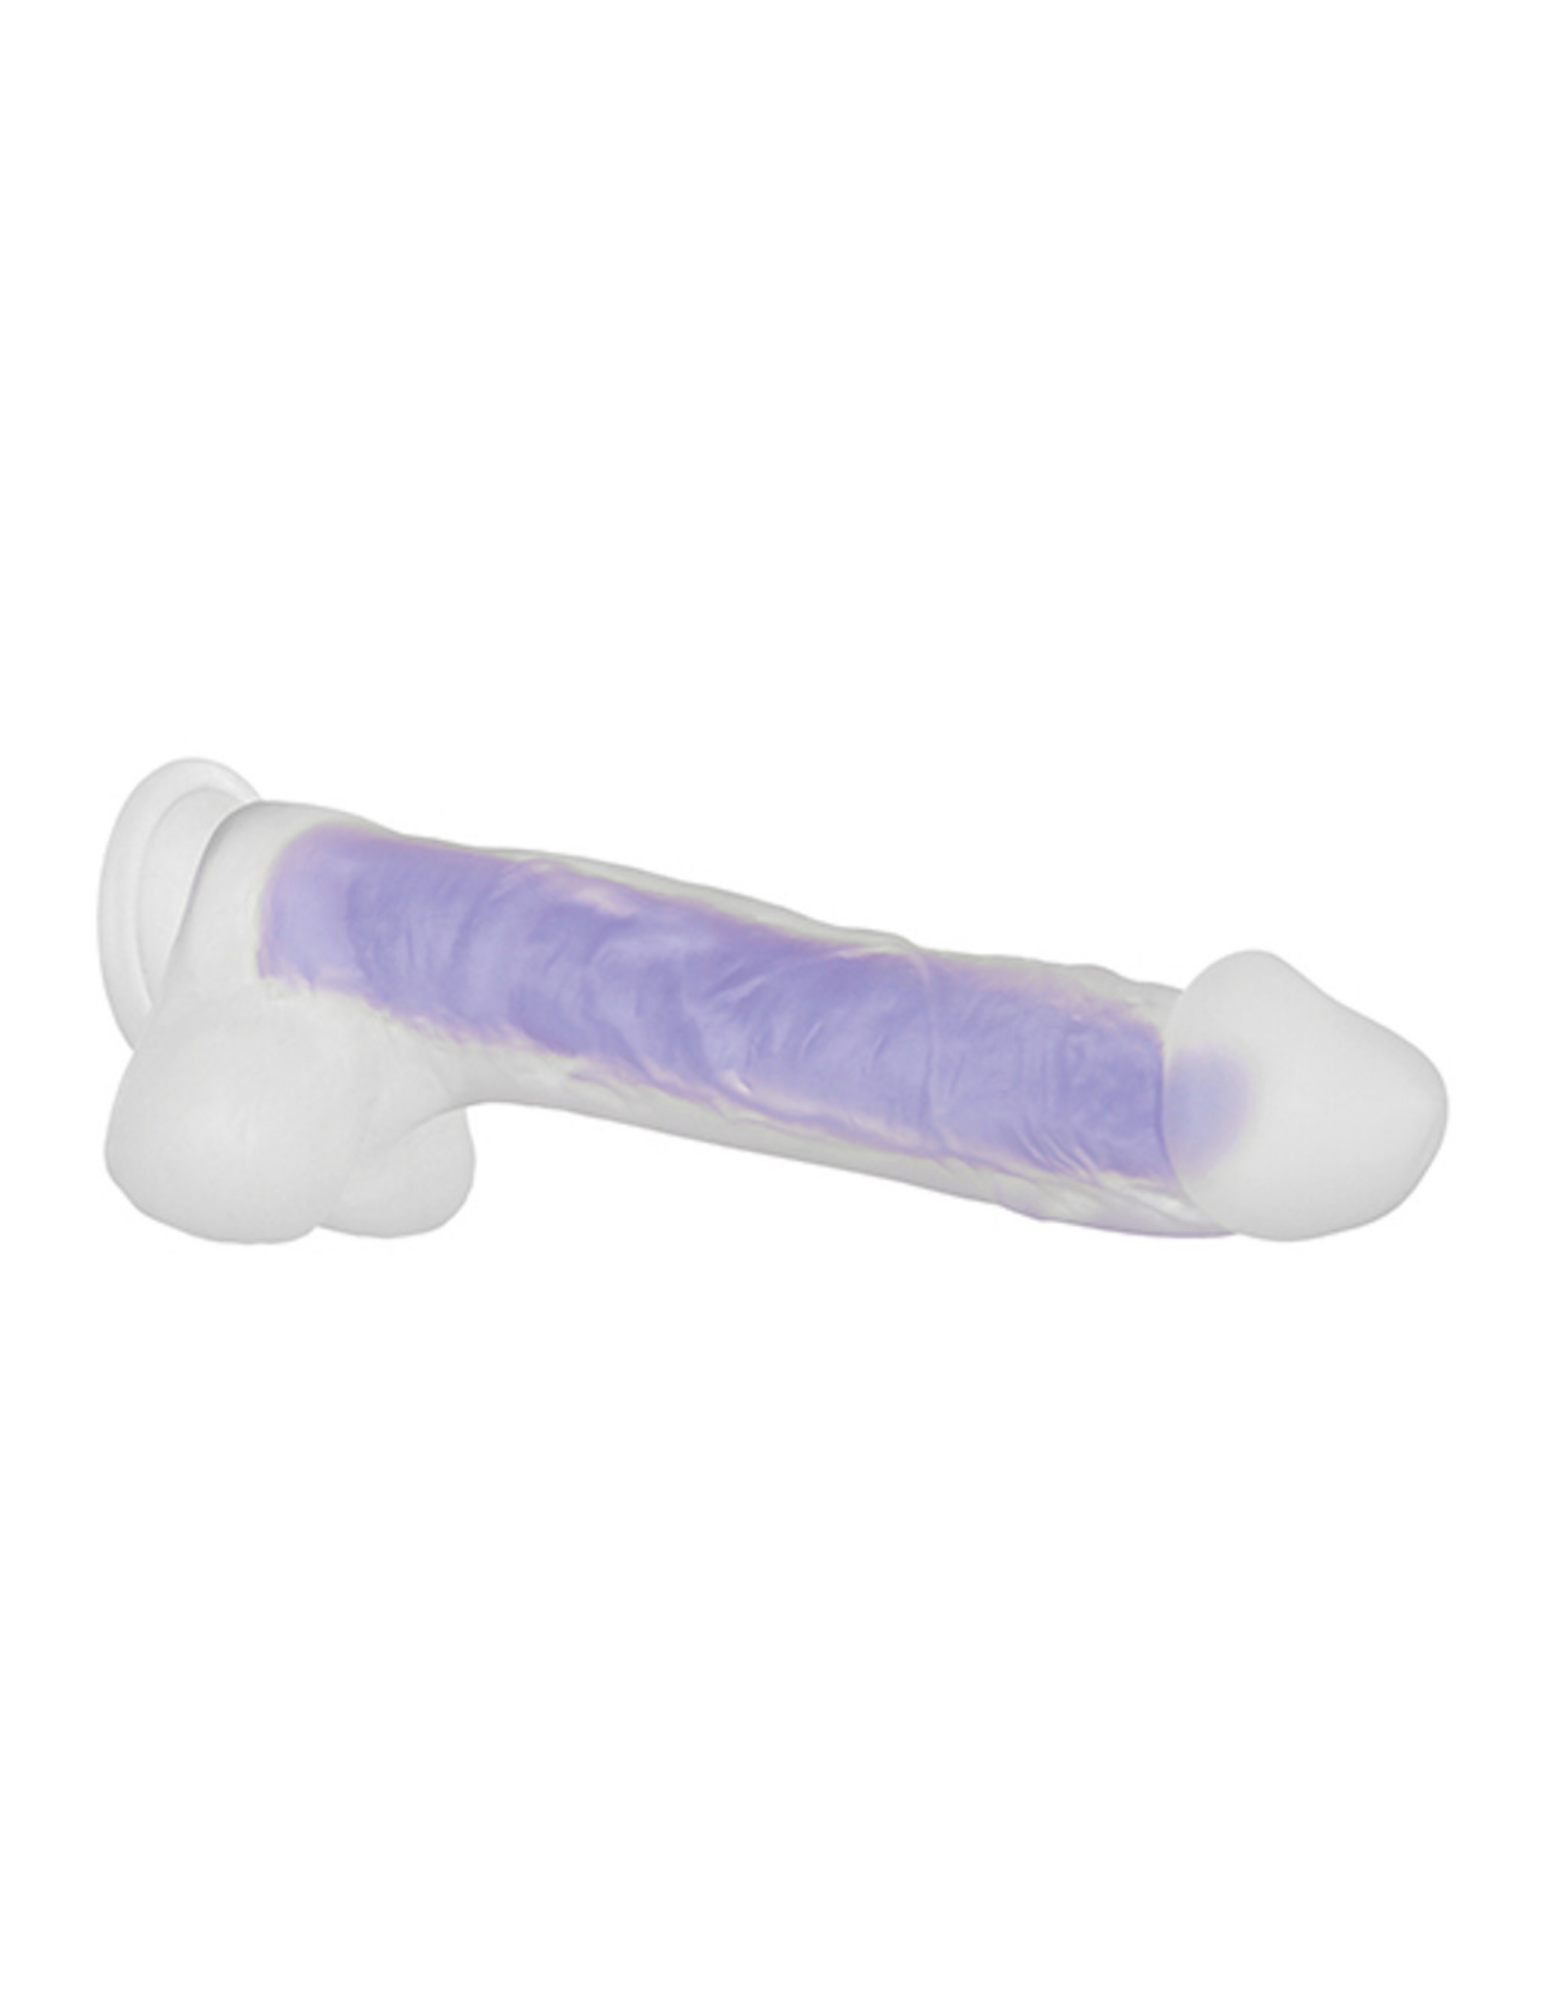 Side view of the Luminous Dildo (stud) from Evolved Novelties shows the realistic head and testicles.